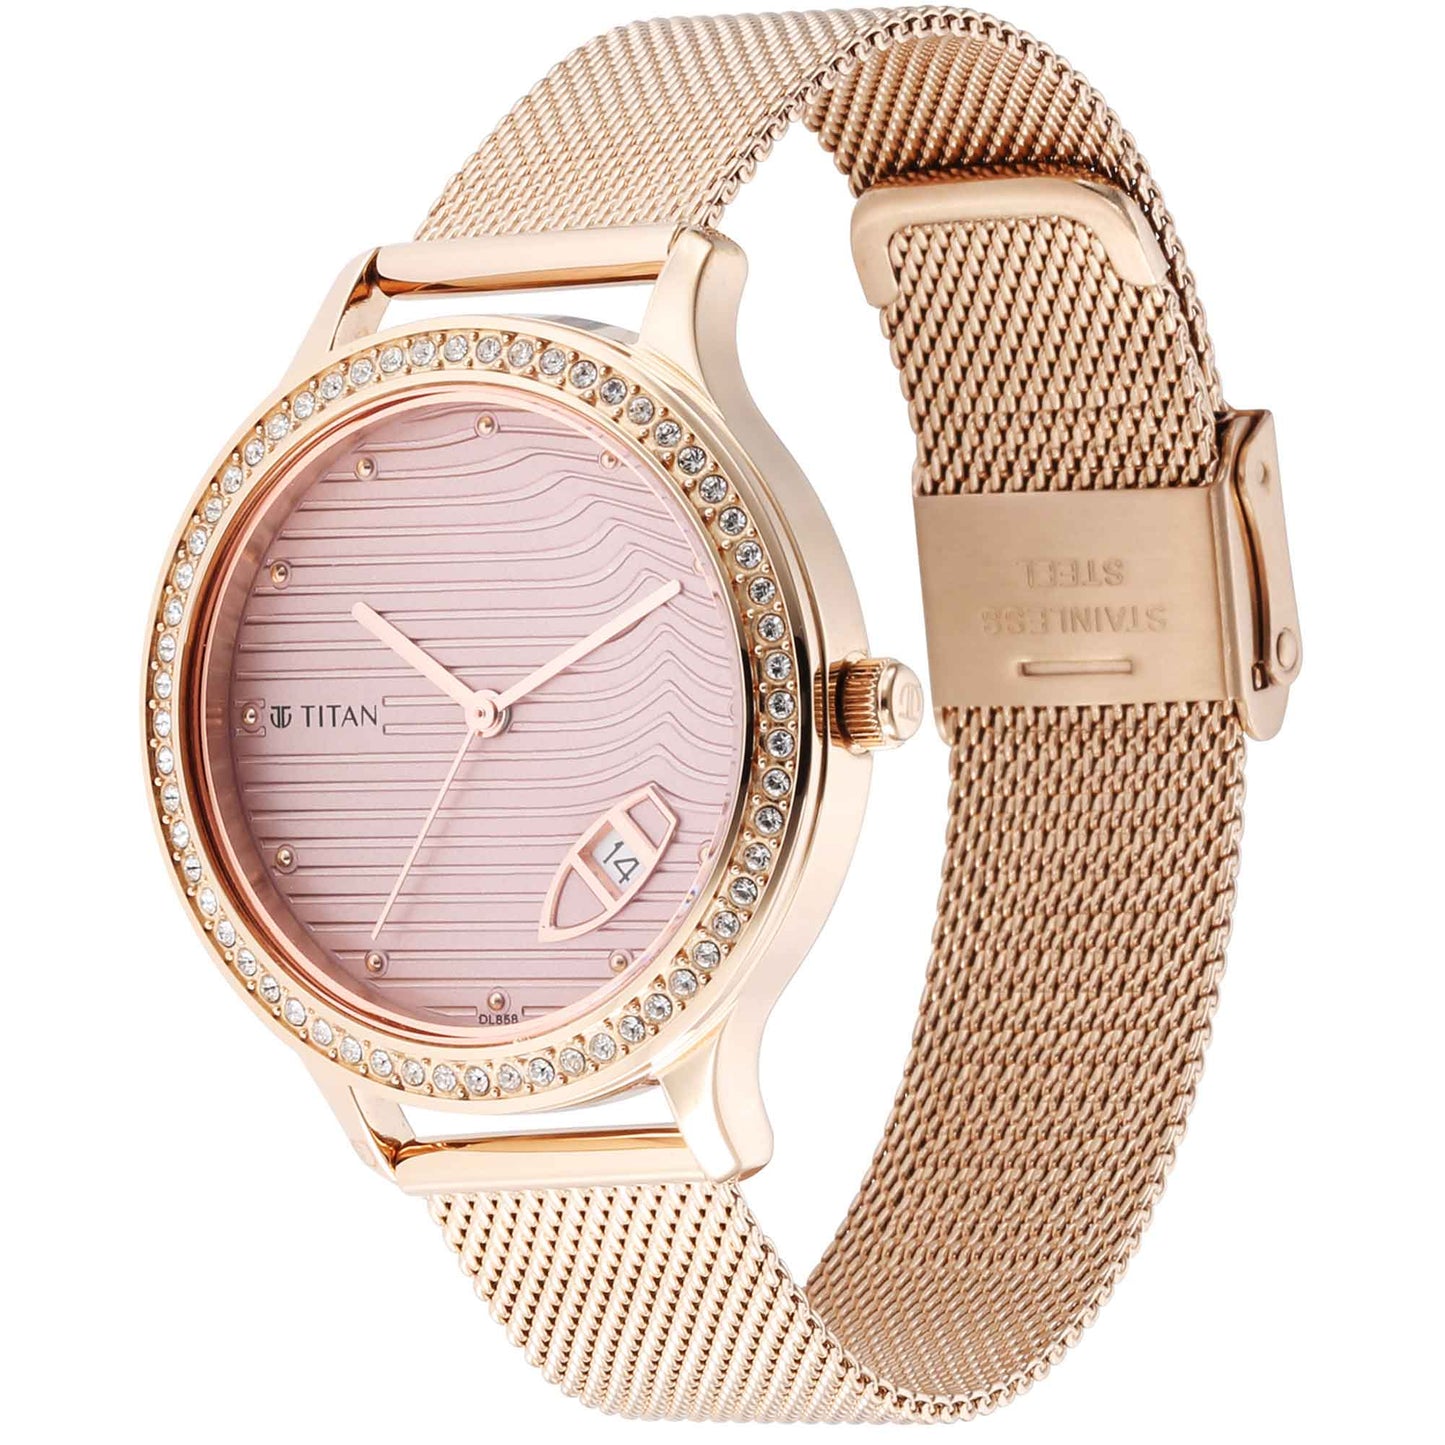 Titan Wander Light Brown Dial Analog Stainless Steel Strap Watch for Women